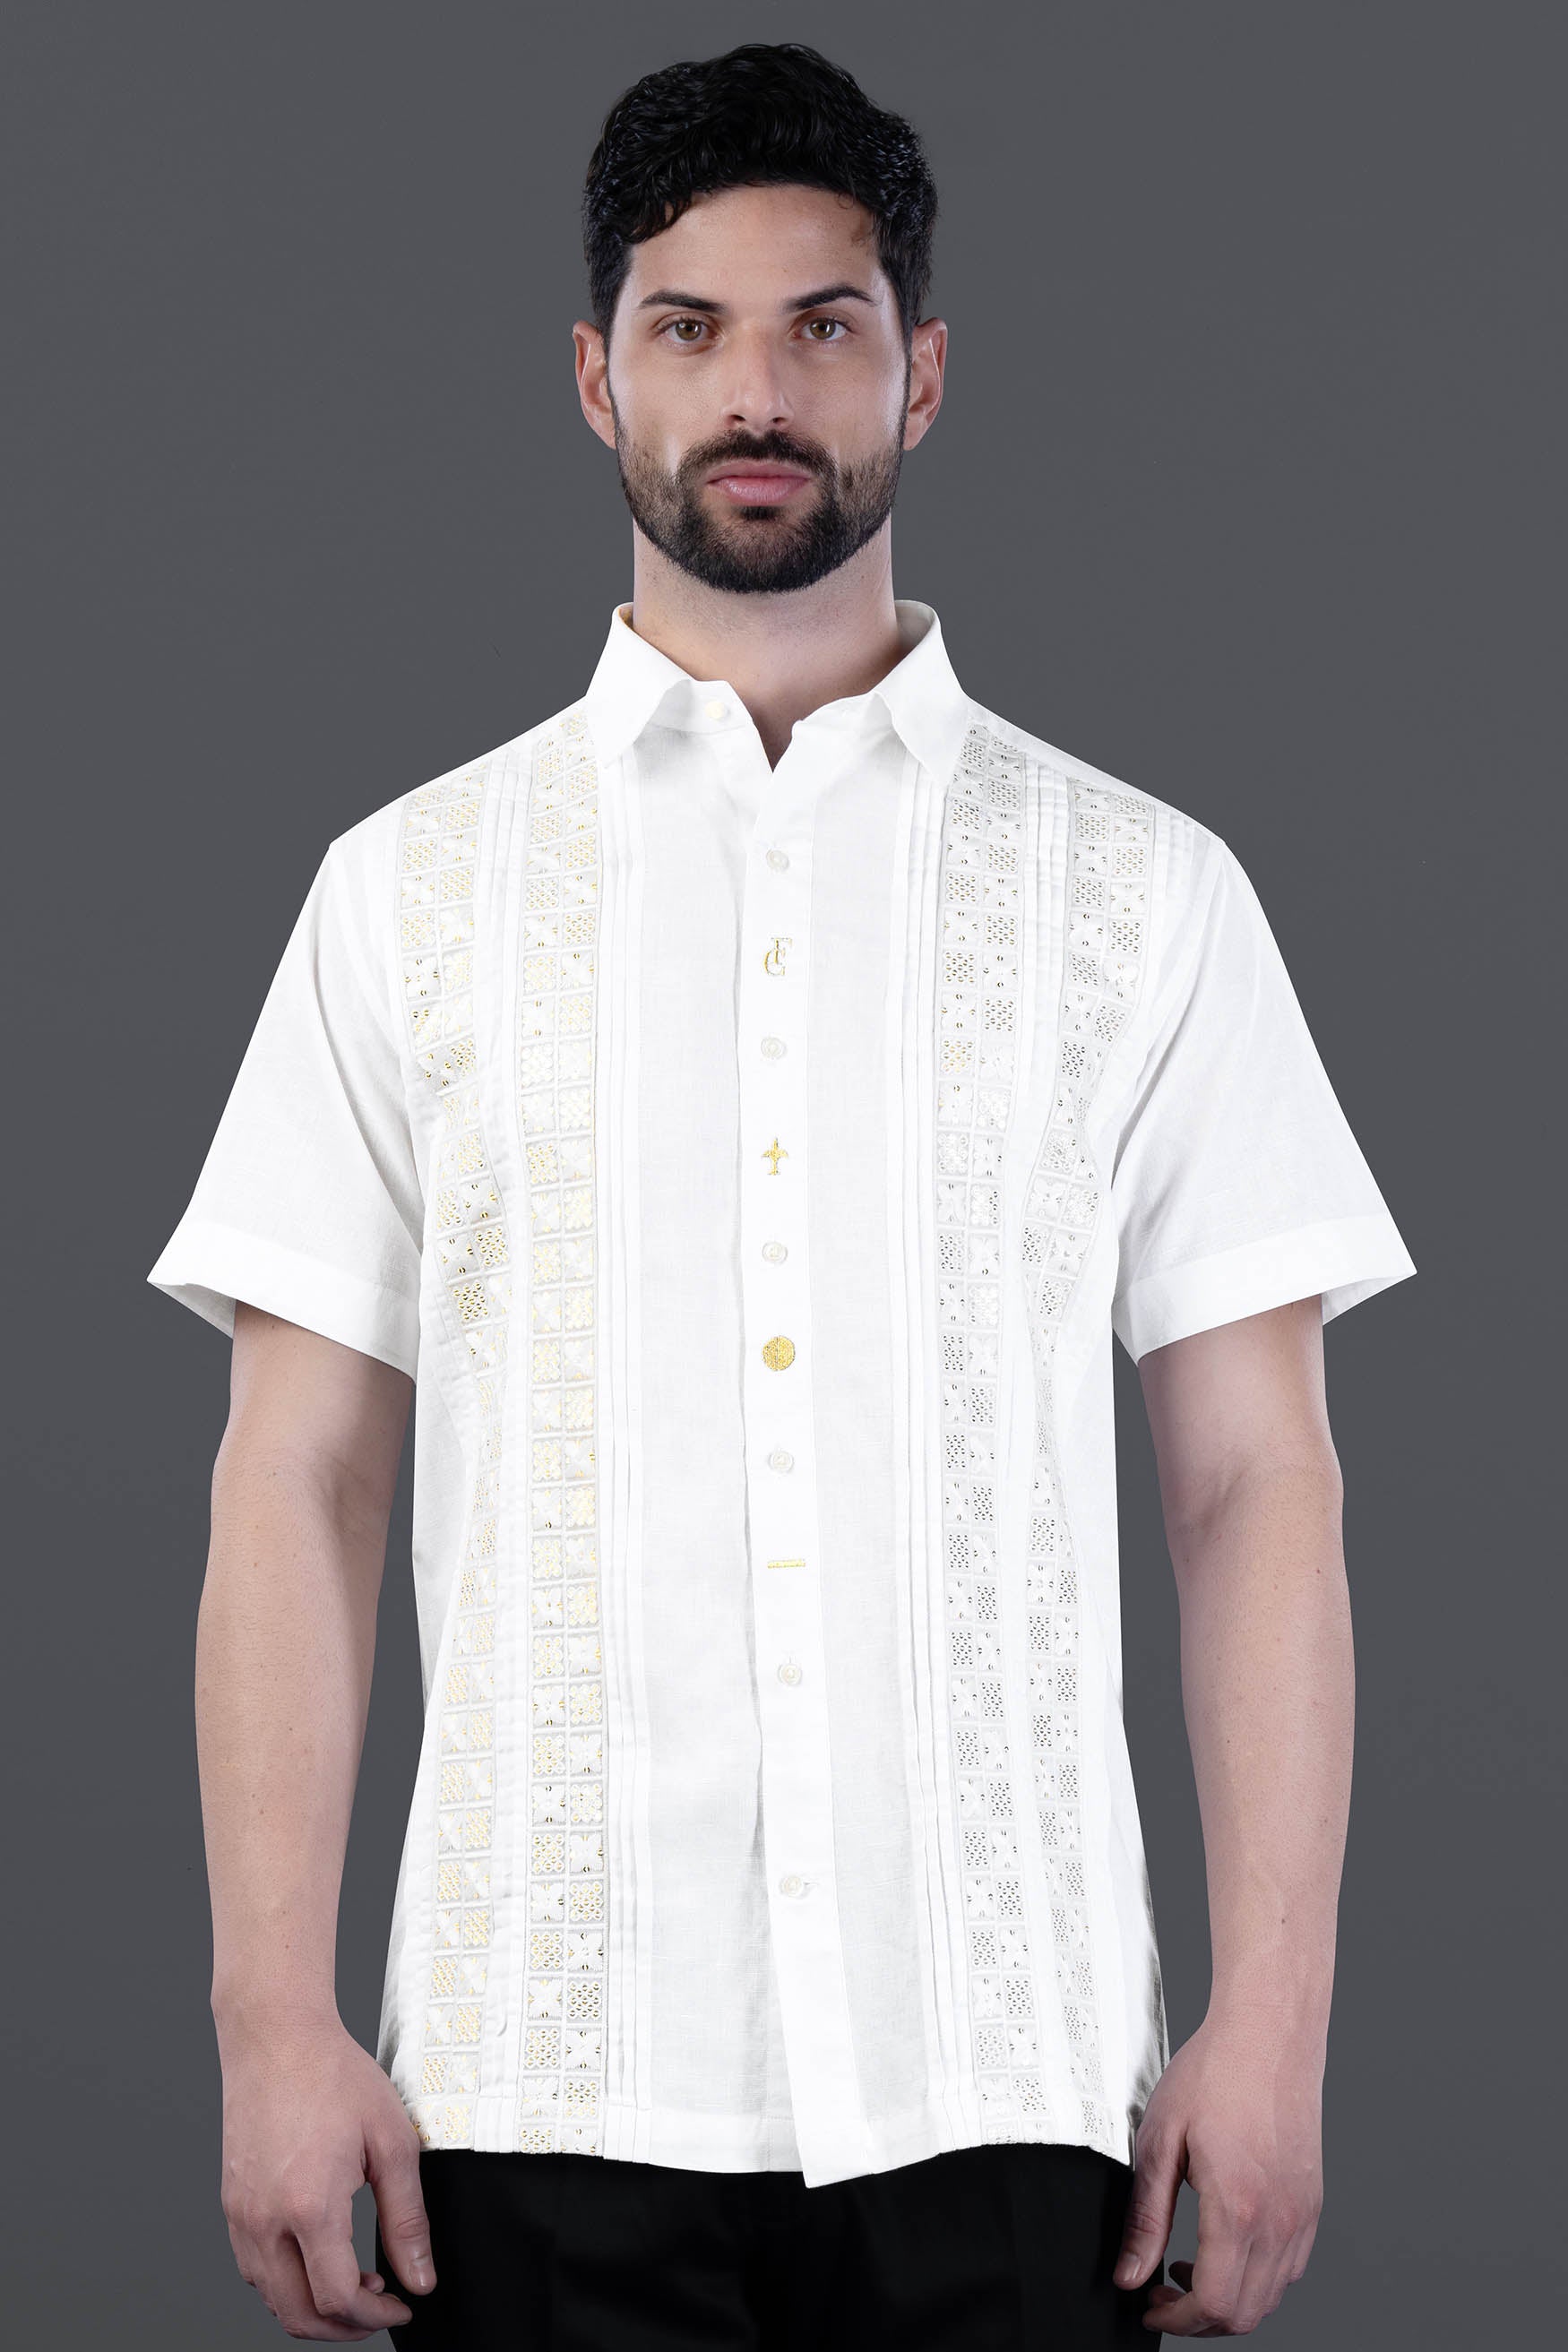 Bright White with Tikki Work and Brand Element Embroidered Luxurious Linen Half Sleeved Designer Shirt 12109-SS-P819-E362-38, 12109-SS-P819-E362-39, 12109-SS-P819-E362-40, 12109-SS-P819-E362-42, 12109-SS-P819-E362-44, 12109-SS-P819-E362-46, 12109-SS-P819-E362-48, 12109-SS-P819-E362-50, 12109-SS-P819-E362-52